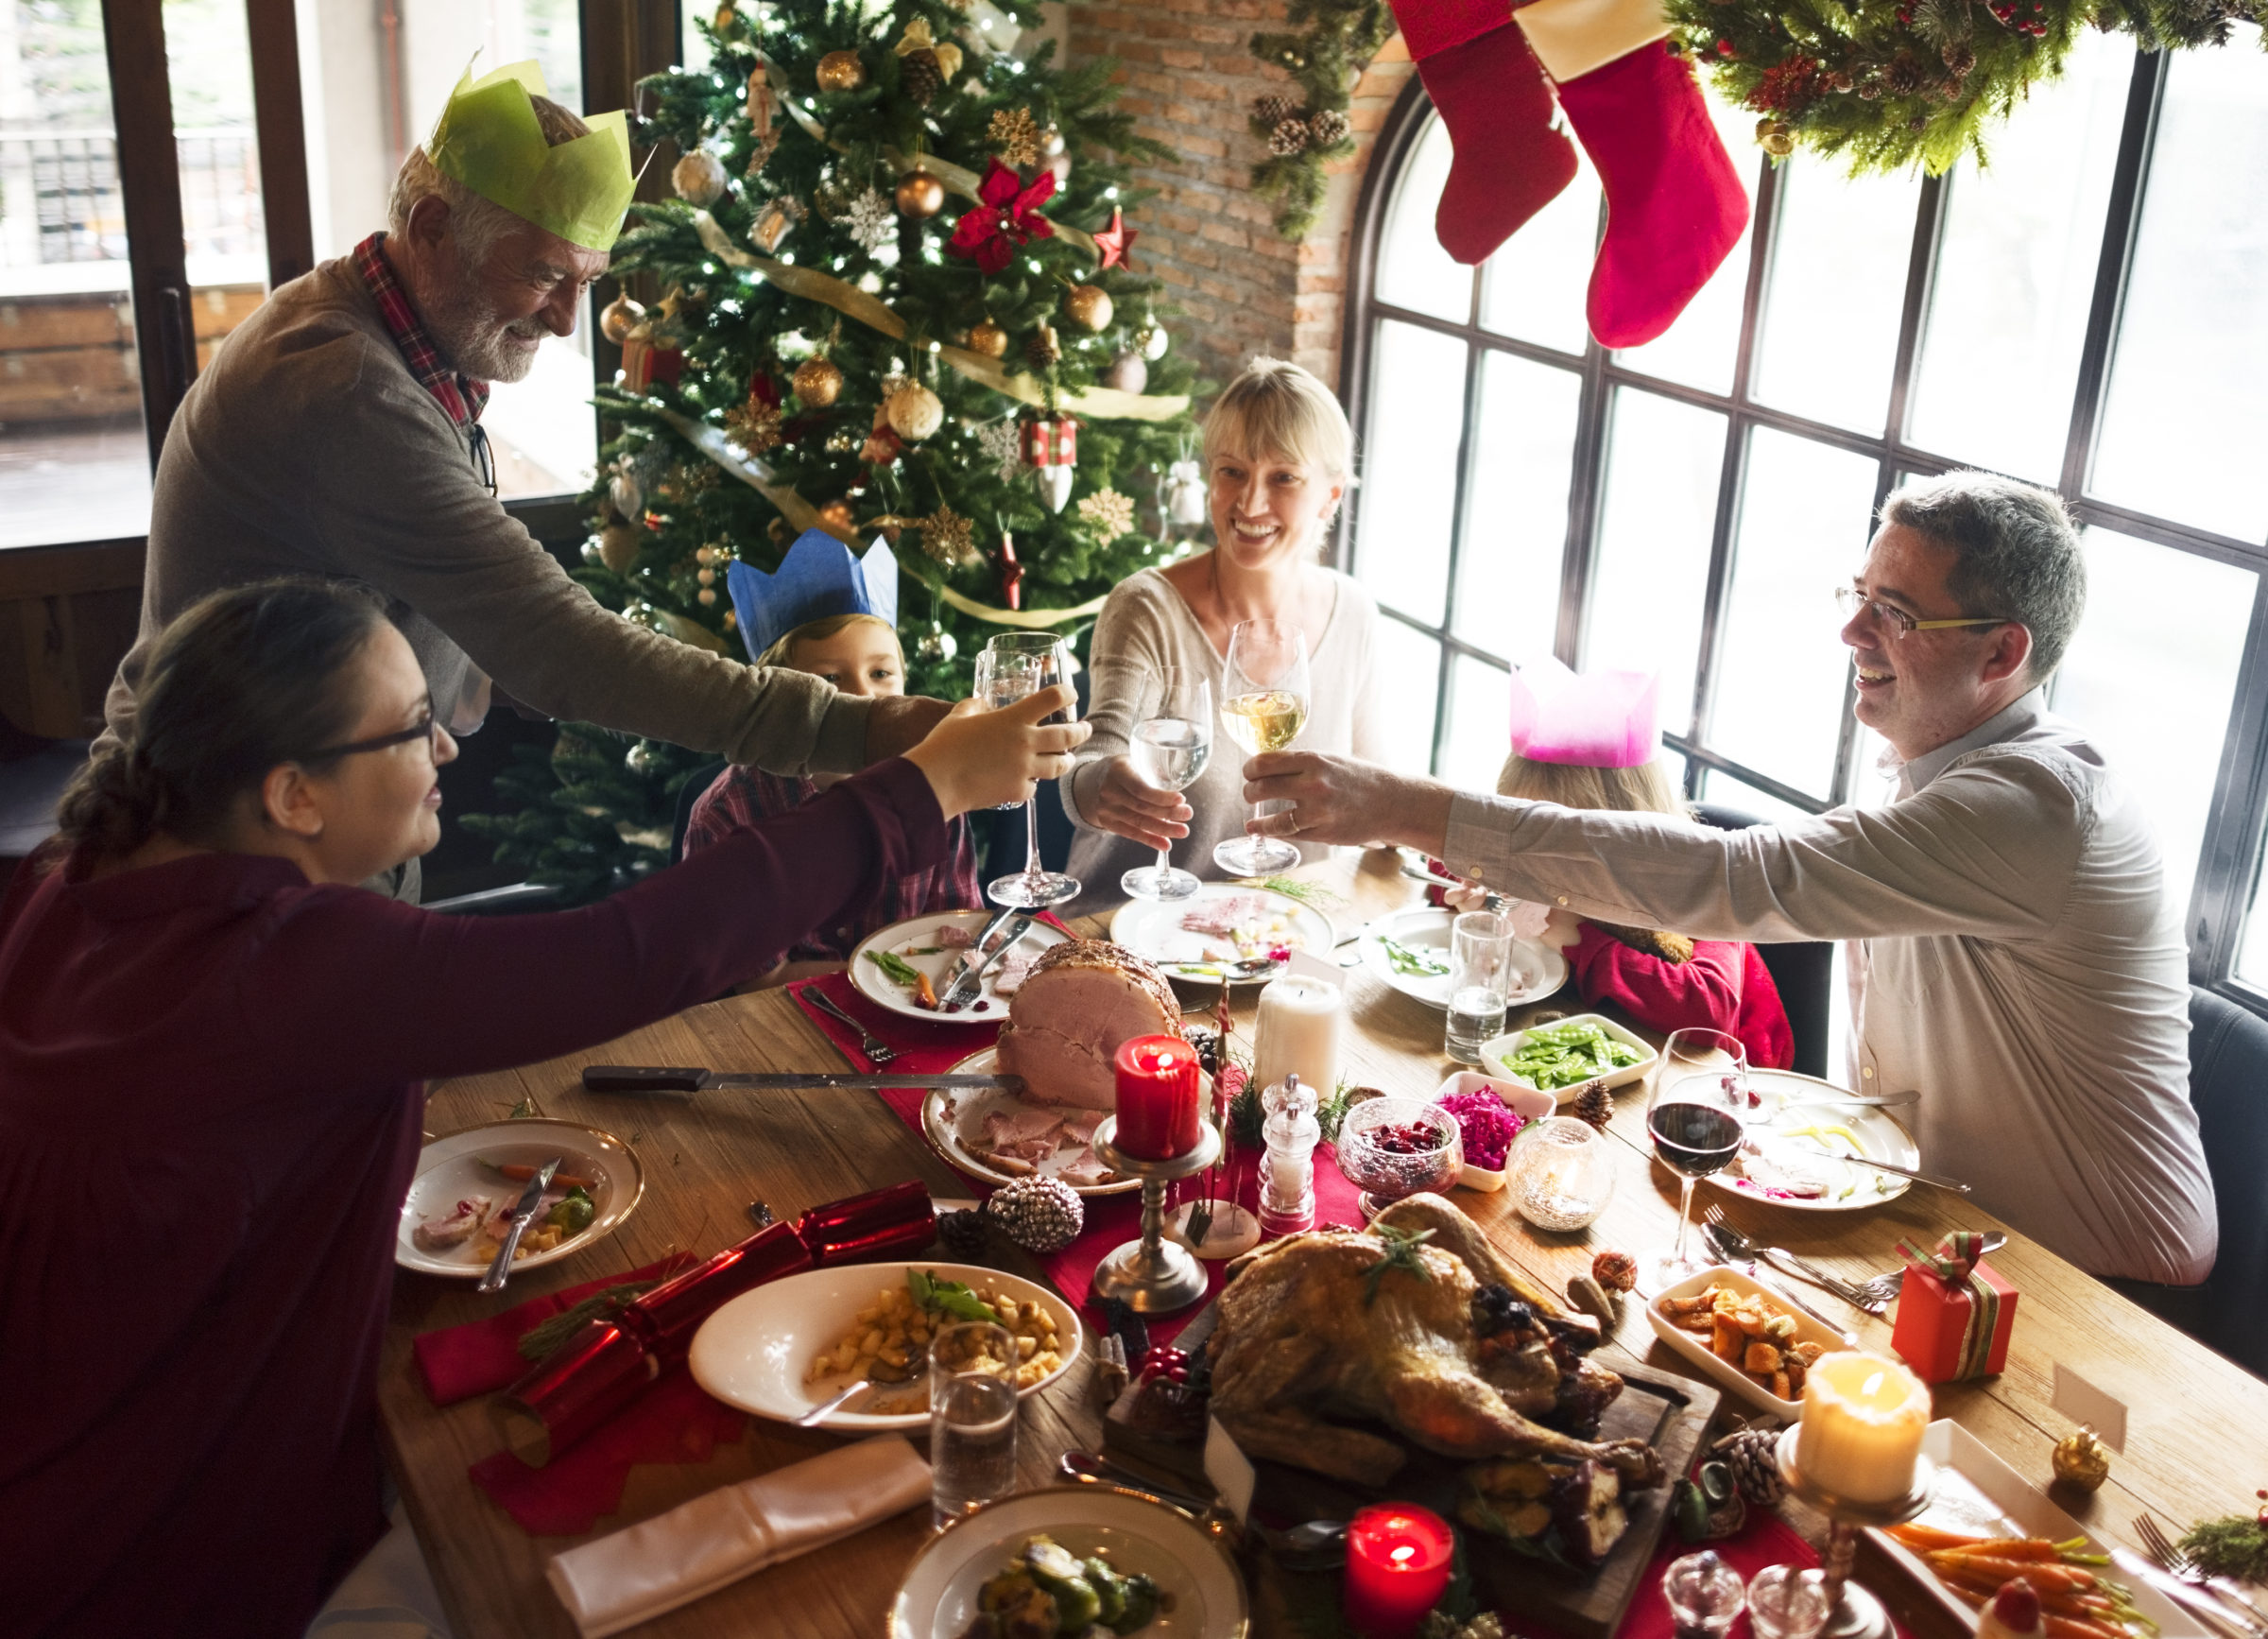 How Caregivers Can Use Holiday Reunions to Their Advantage